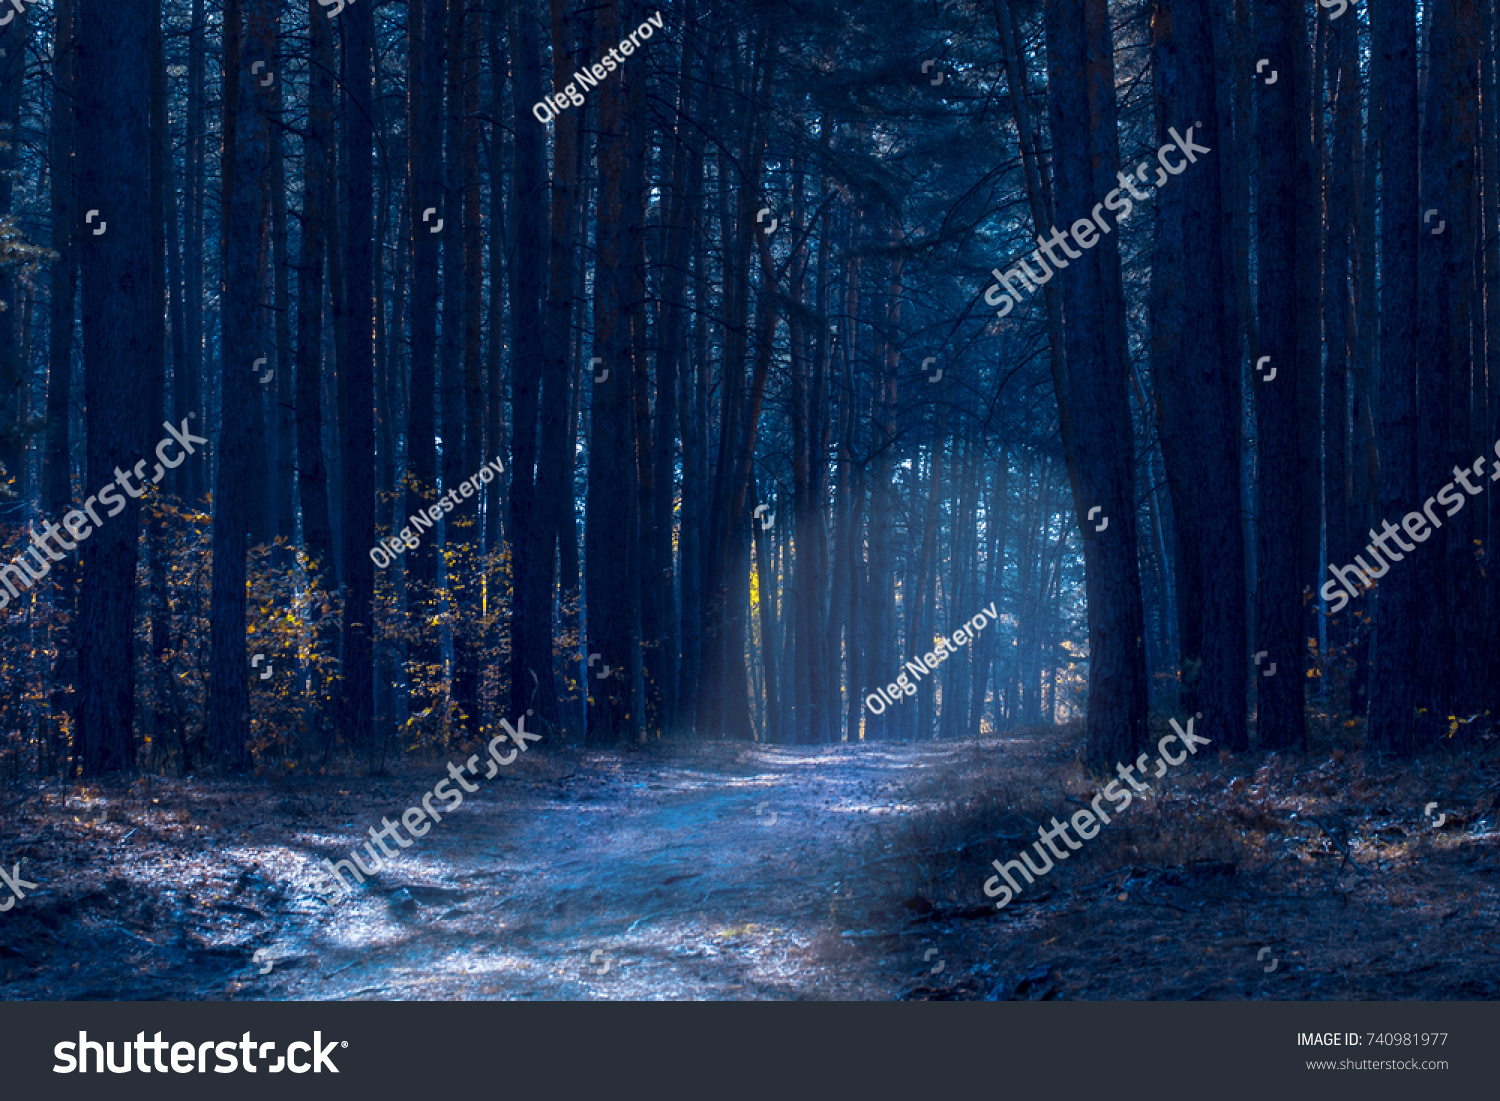 bright path along the tall pines in a dark and mysterious forest is very exciting #740981977